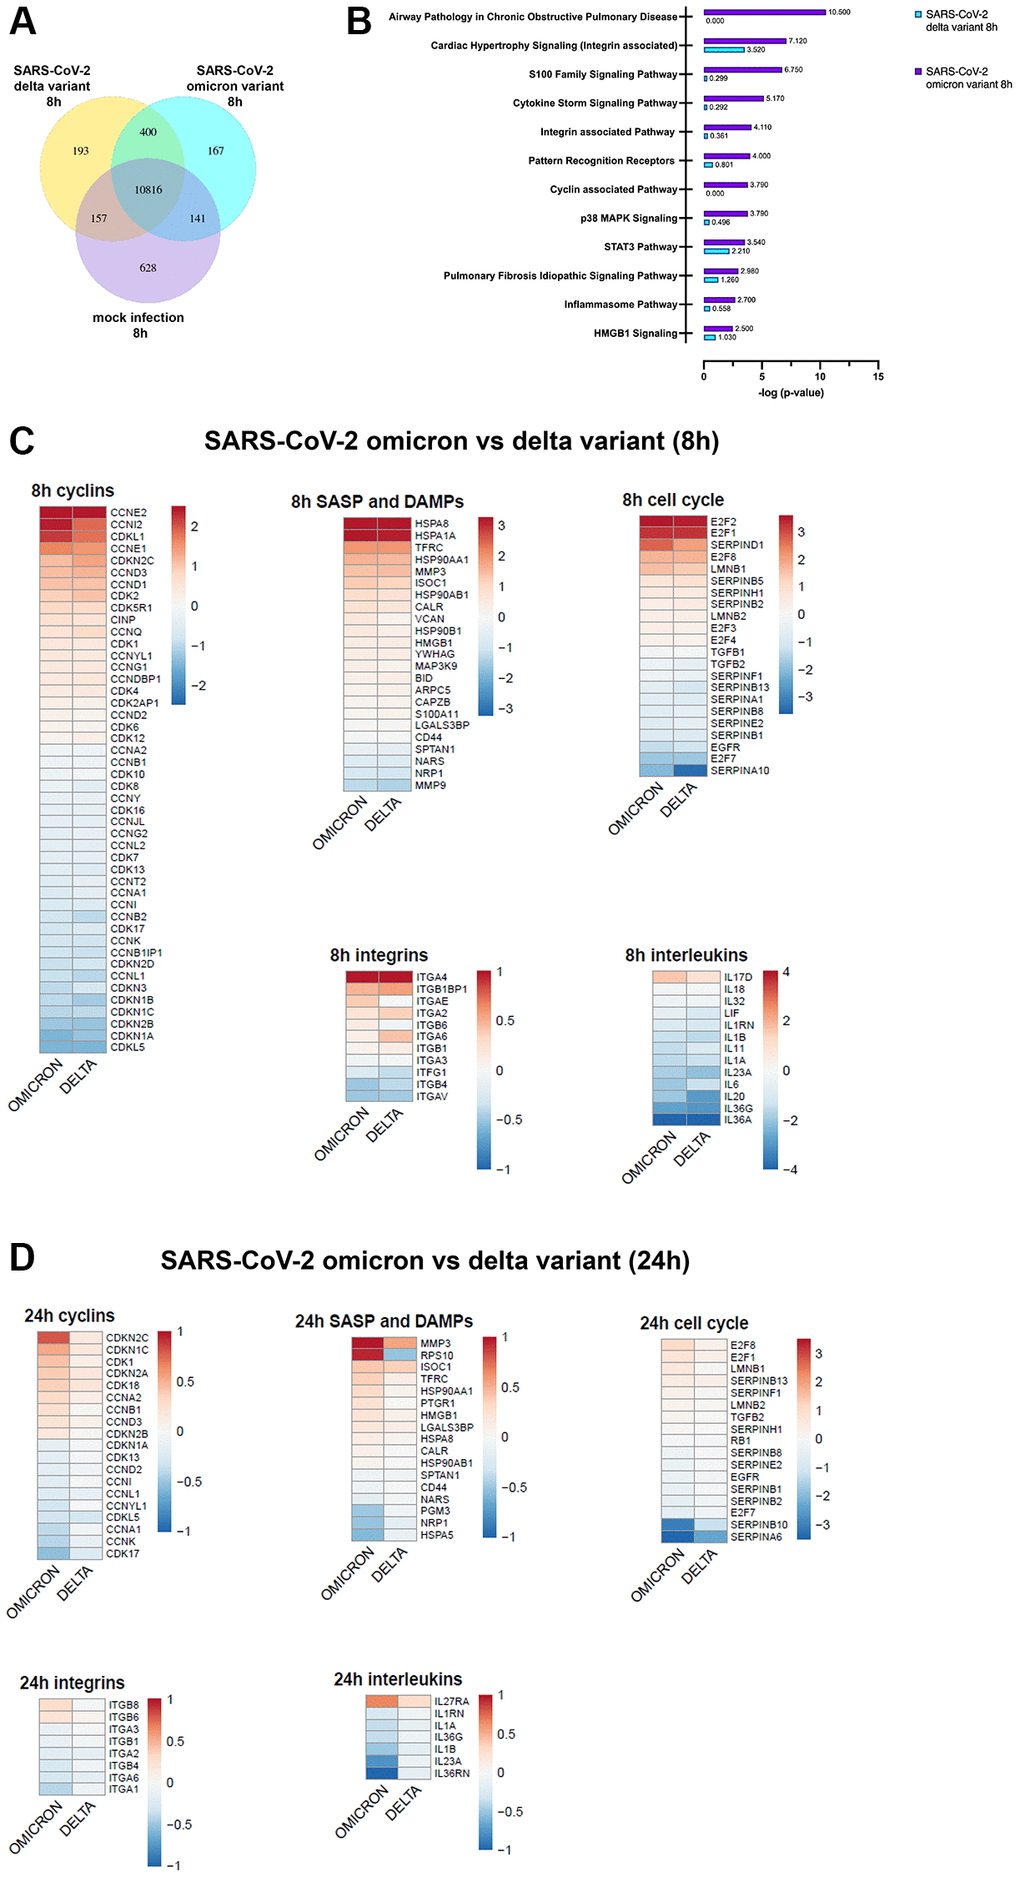 (A) Infection with SARS-CoV-2 variants alters the gene expression patterns of SAEC cells. Co-expression Venn Diagram showing regulated genes of mock, omicron- and delta variant infected cells identified via mRNA-sequencing 8 h p.i.. (B) Pathways with significant enrichment scores (-log (p-value)) revealed by QIAGEN Ingenuity Pathway Analysis 8 h p.i. indicates significant increase of gene regulation in omicron-infected cells. (C, D) Representative heatmaps of genes regulated due to omicron variant or delta variant, after 8 h (C) or 24 h (D) p.i. shown in relation to pathway or gene families. Here, selective genes for cyclins, senescence-associated secretory phenotype (SASP), Damage-associated molecular patterns (DAMPS), integrins, interleukins, and cell cycle are shown.